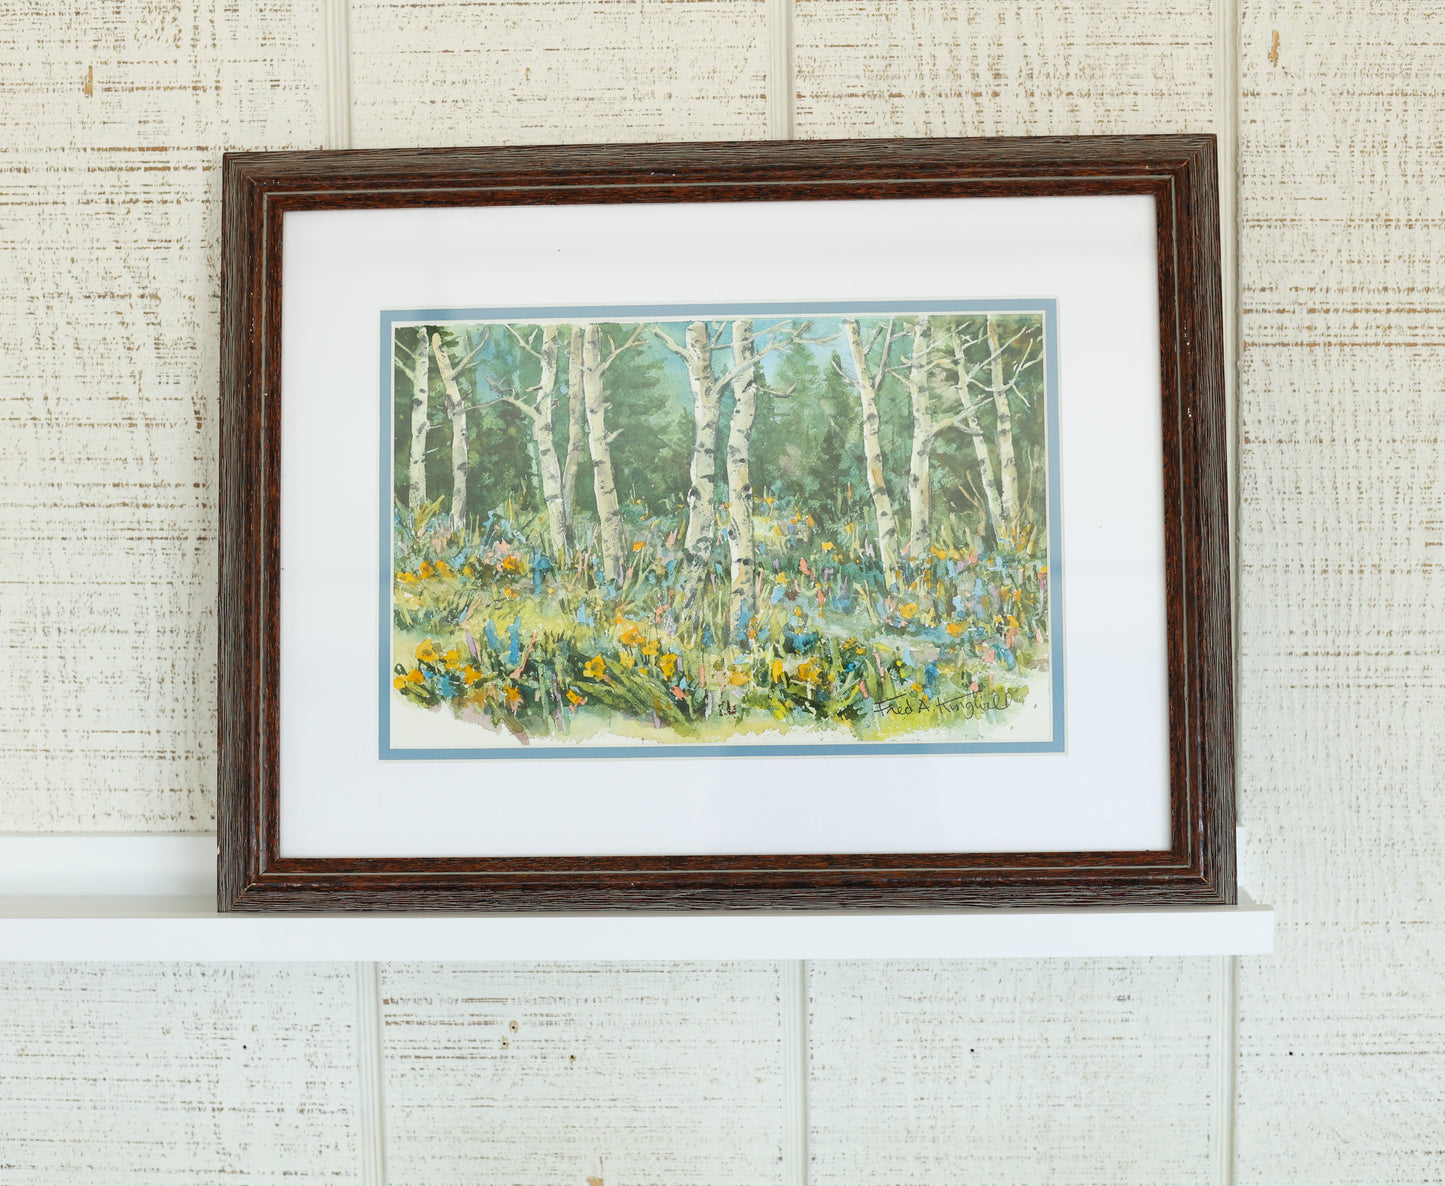 Fred Kingwill: Aspen with Blue Yellow Flowers